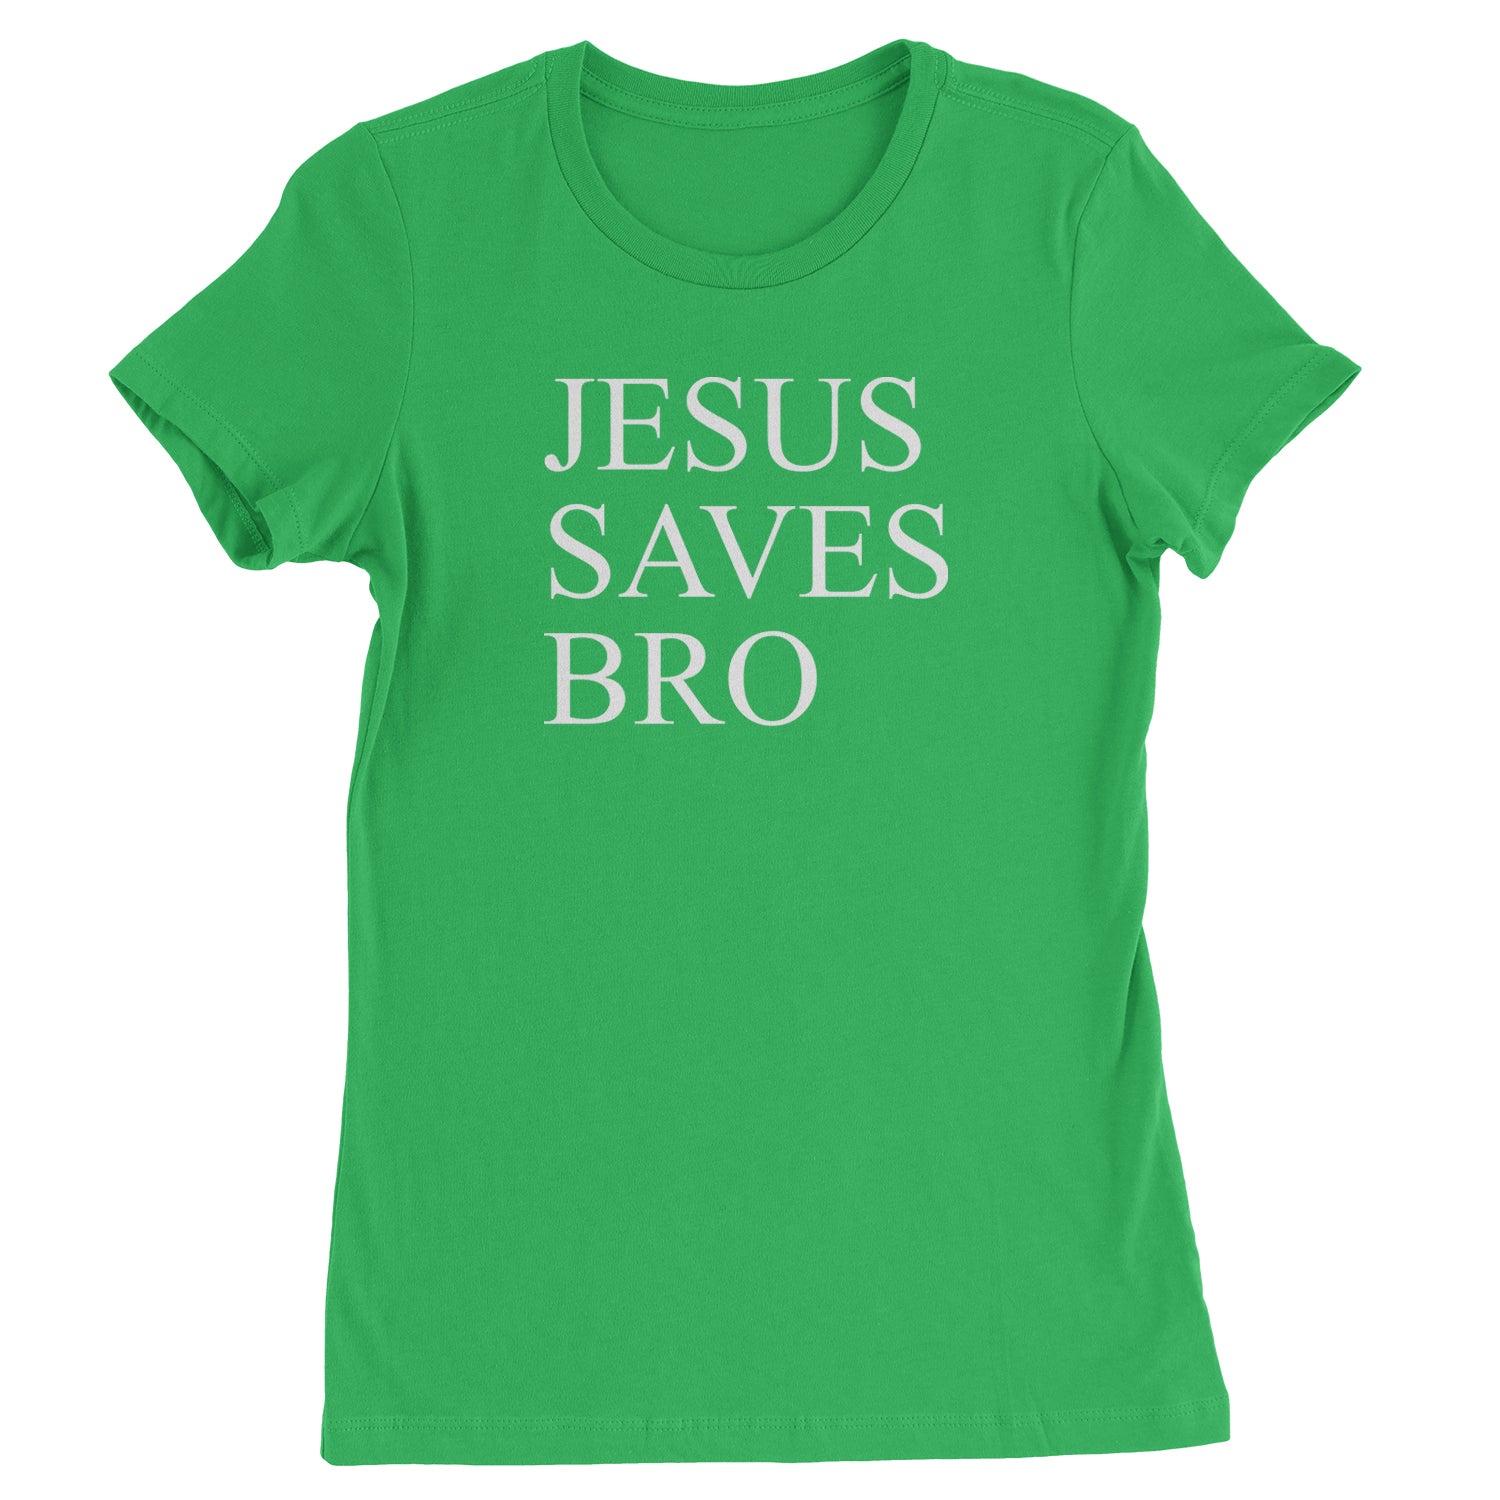 Jesus Saves Bro Womens T-shirt catholic, christian, christianity, church, jesus, religion, religuous by Expression Tees